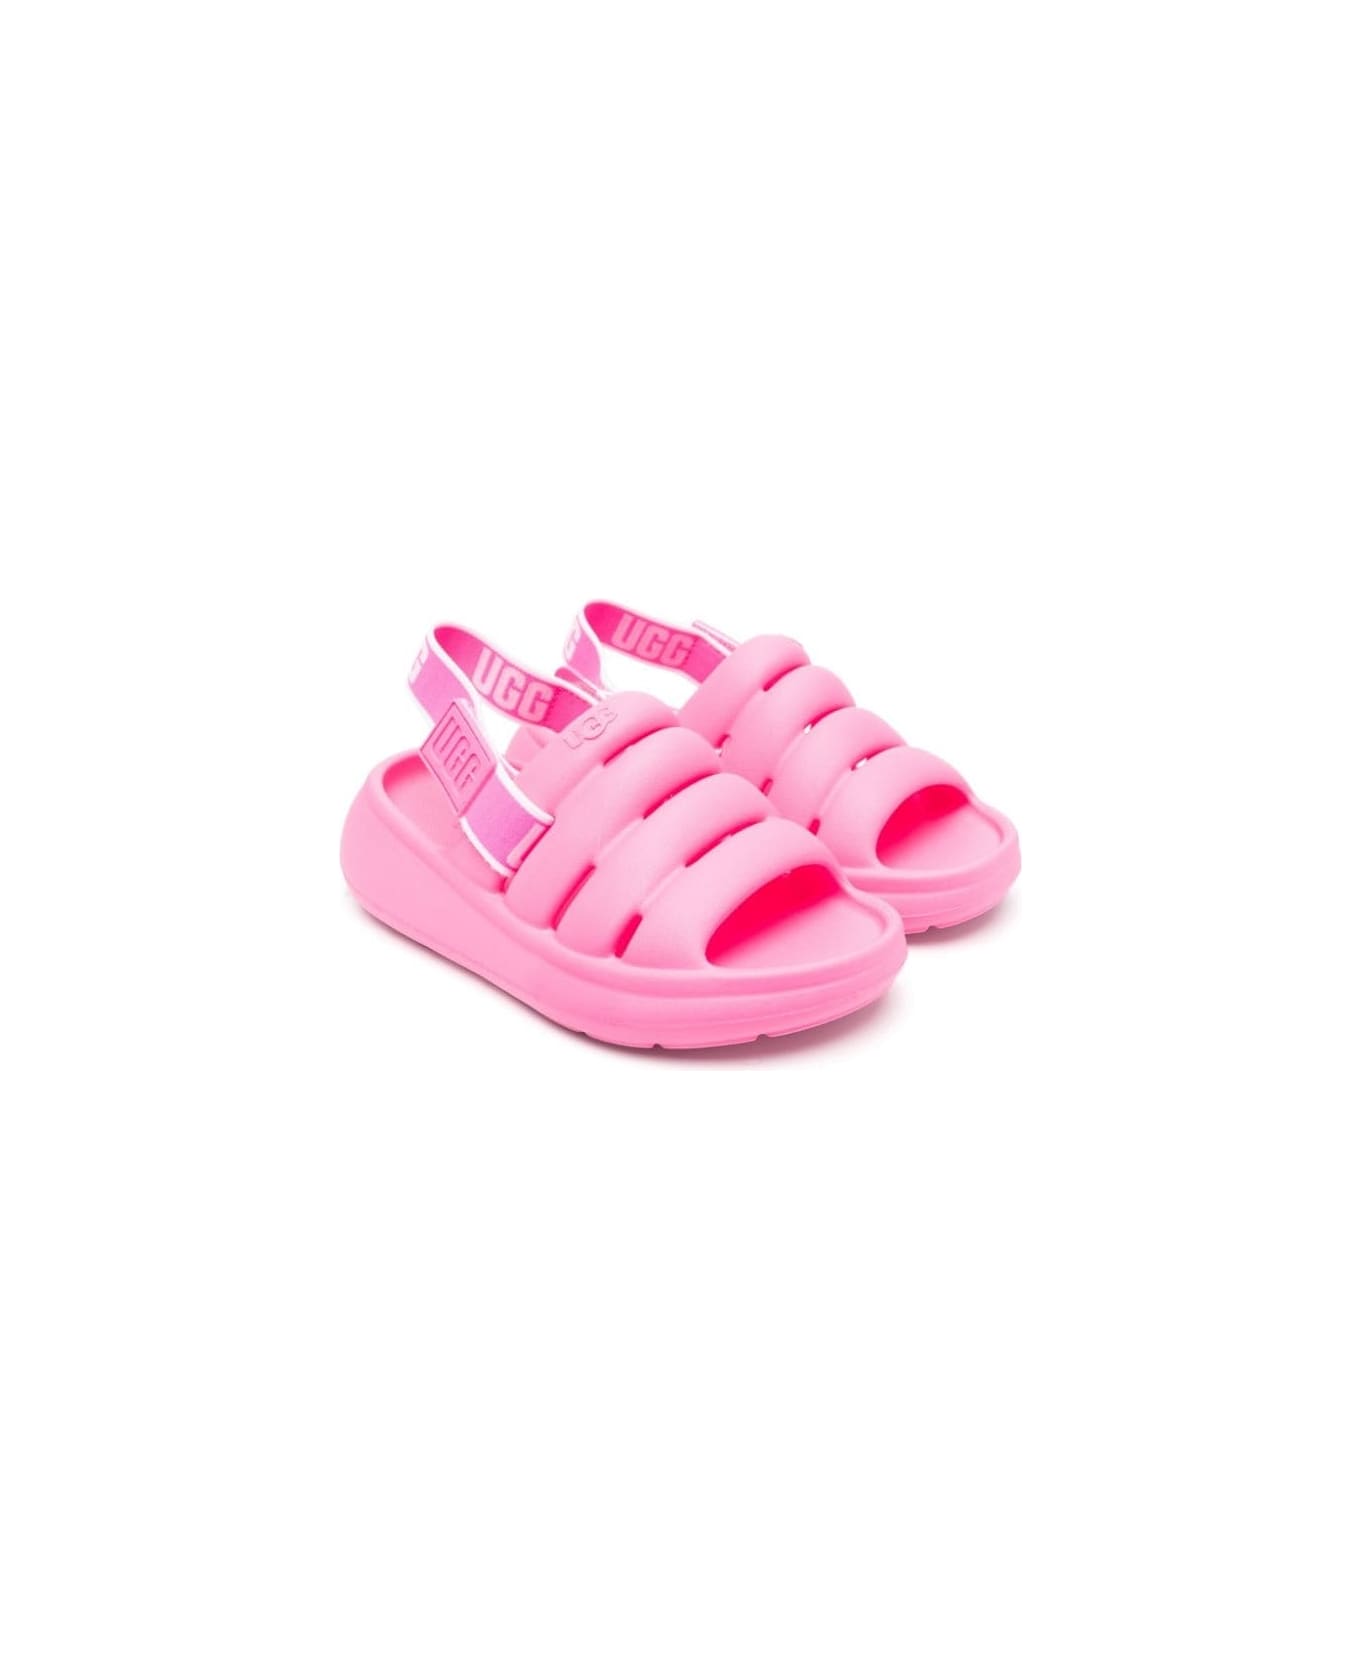 UGG Sandals With Logo - Pink